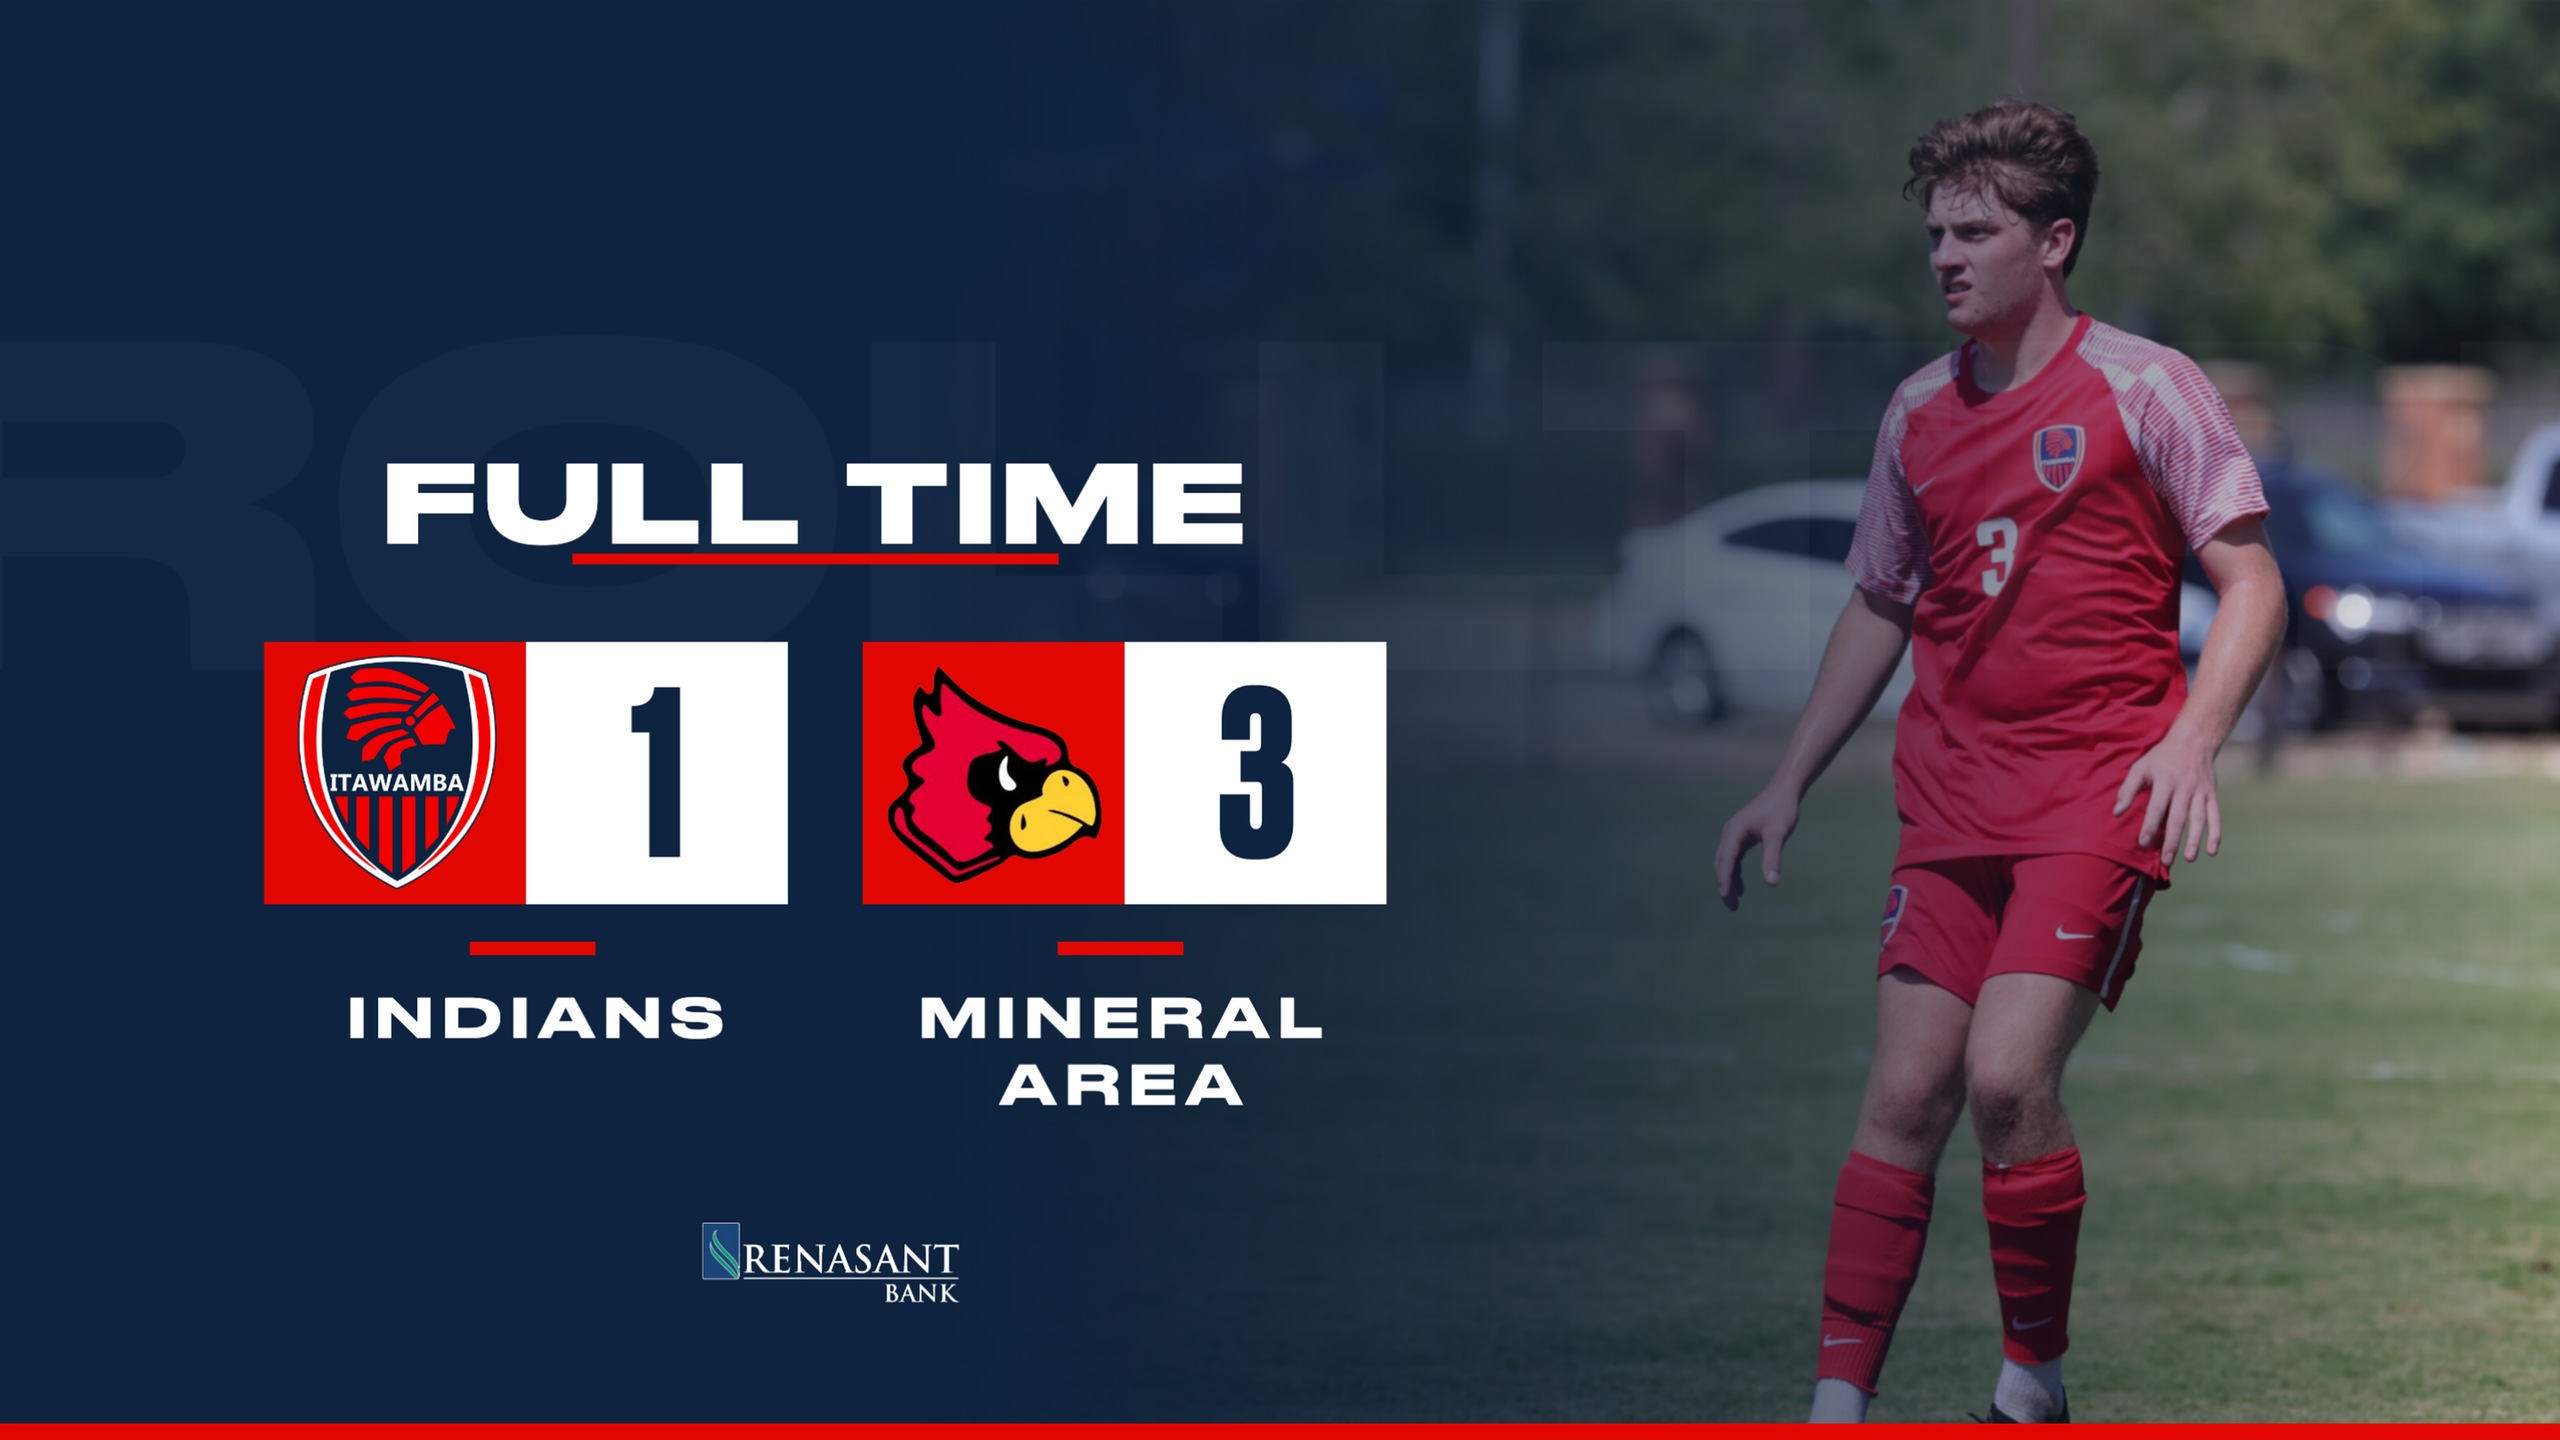 Indians fall to Mineral Area, 3-1